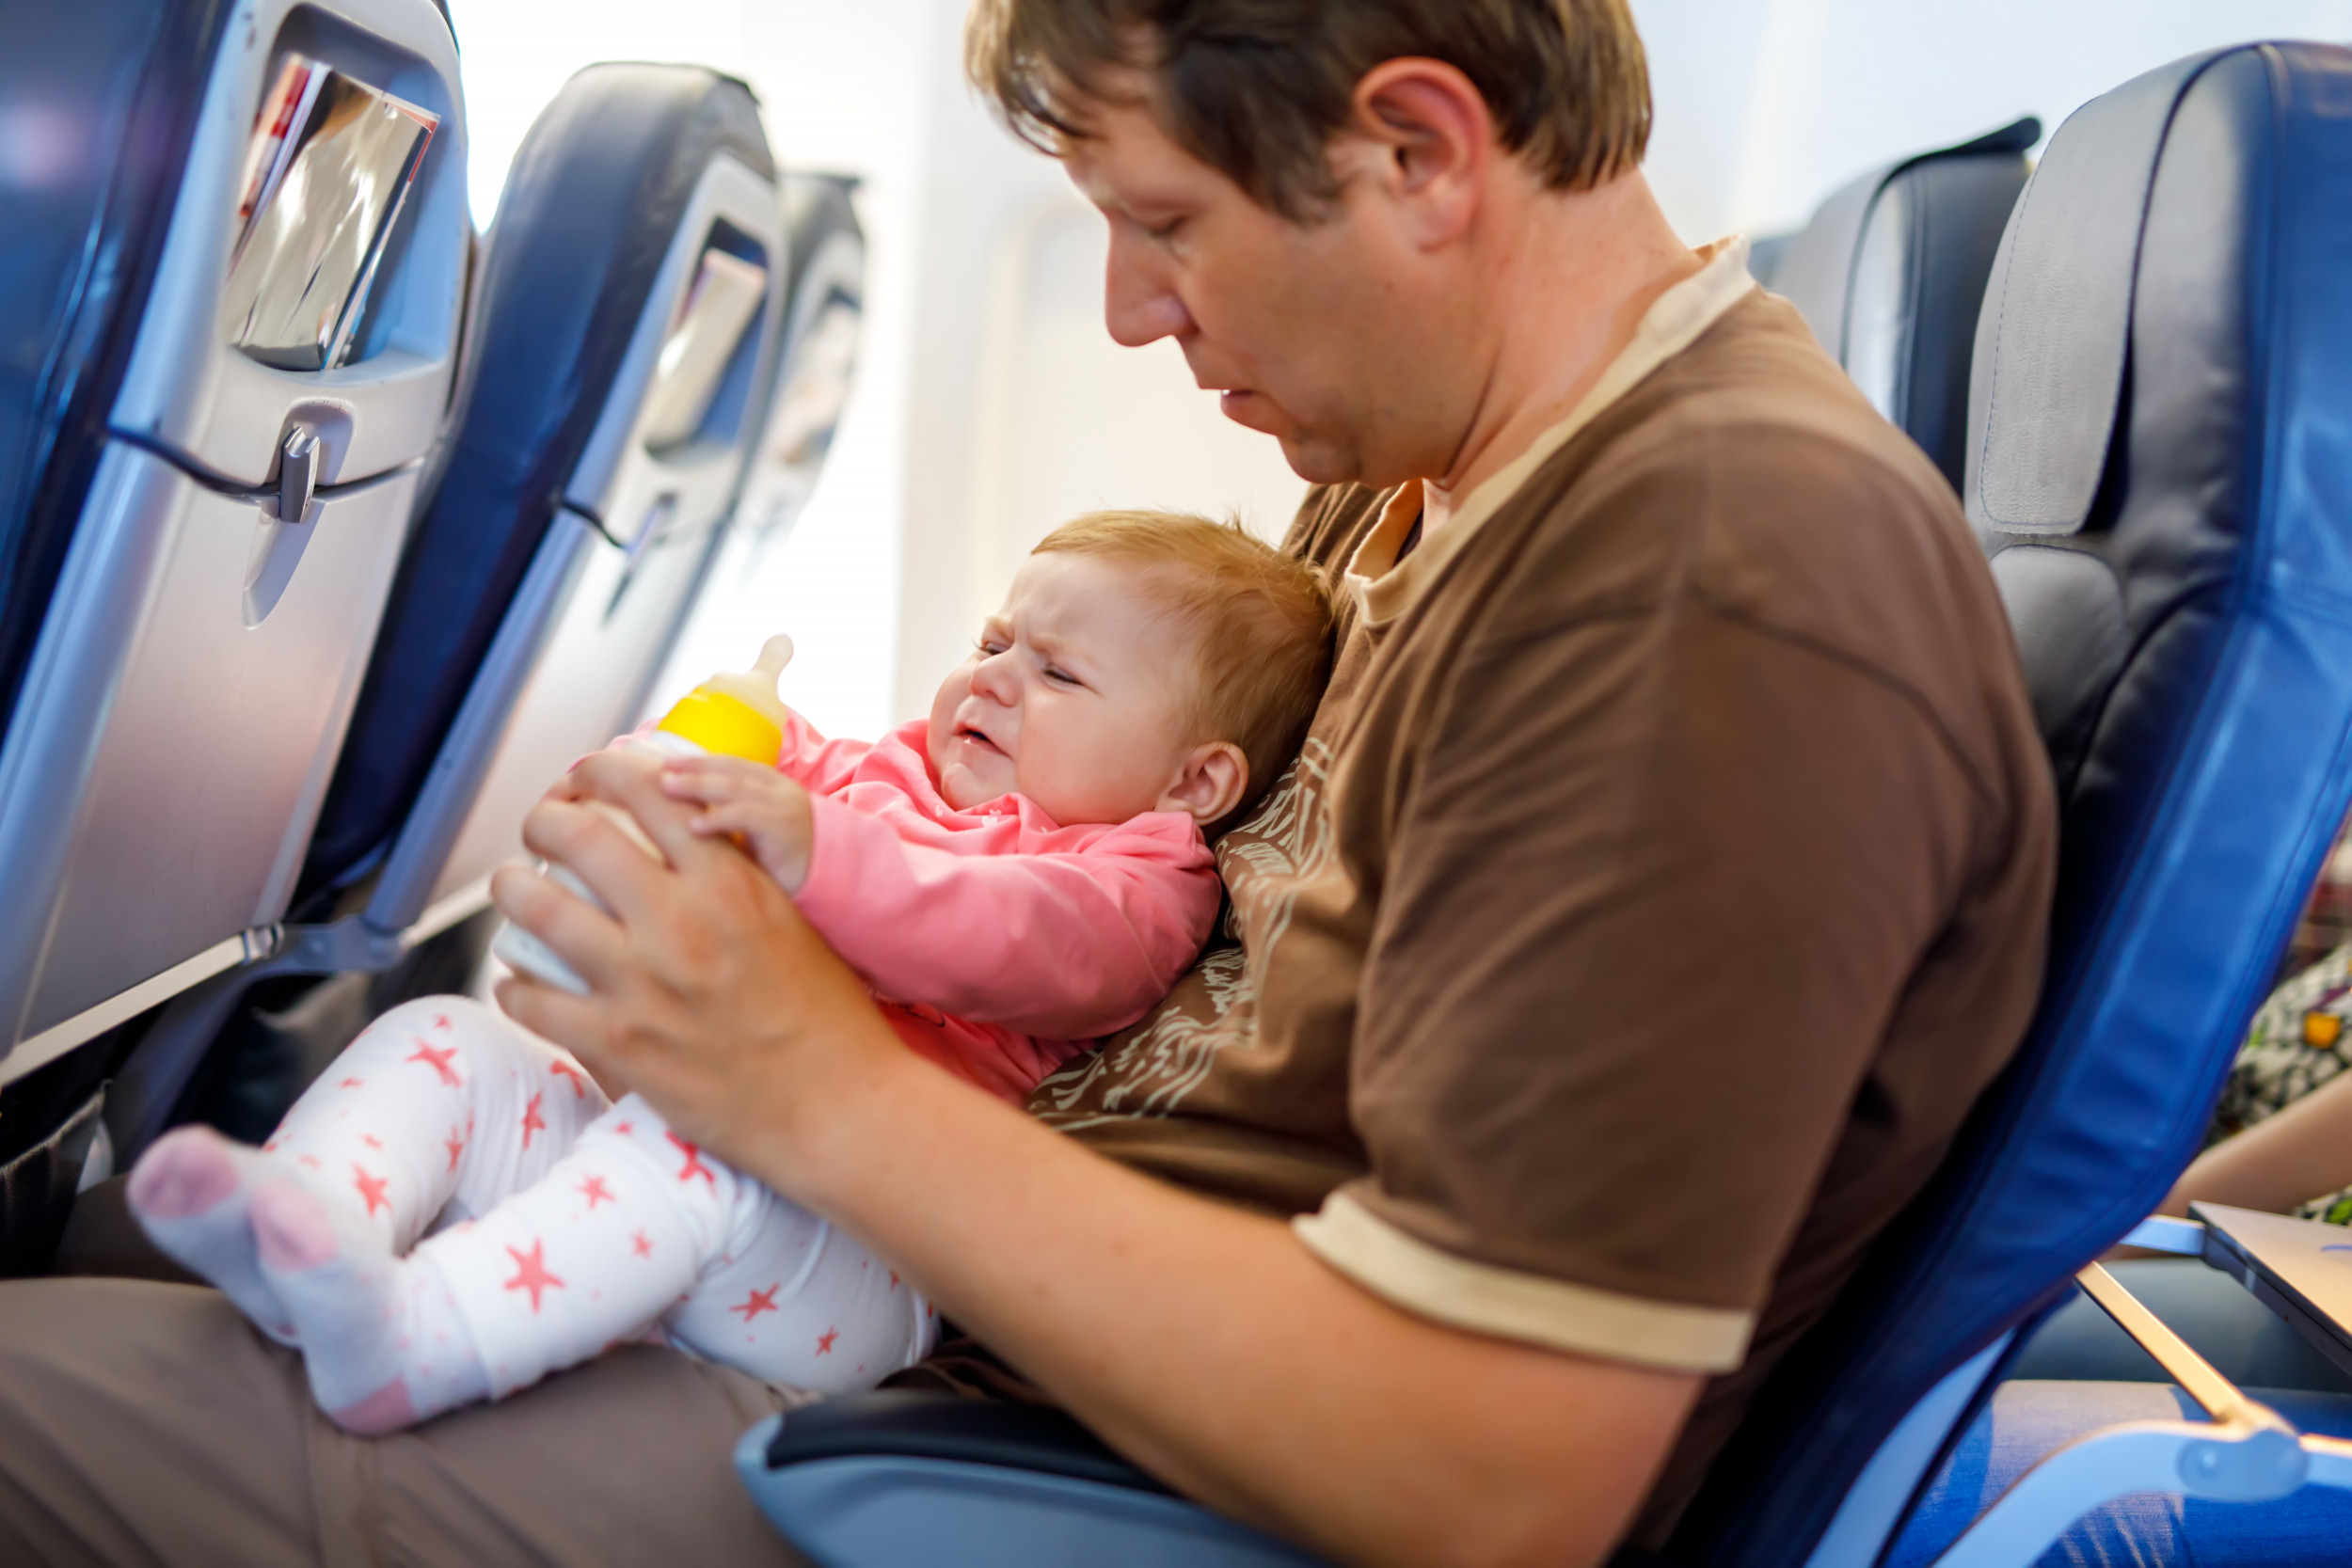 Mom's Plea for People to Stop Getting Mad at Crying Babies on Flights Goes Viral